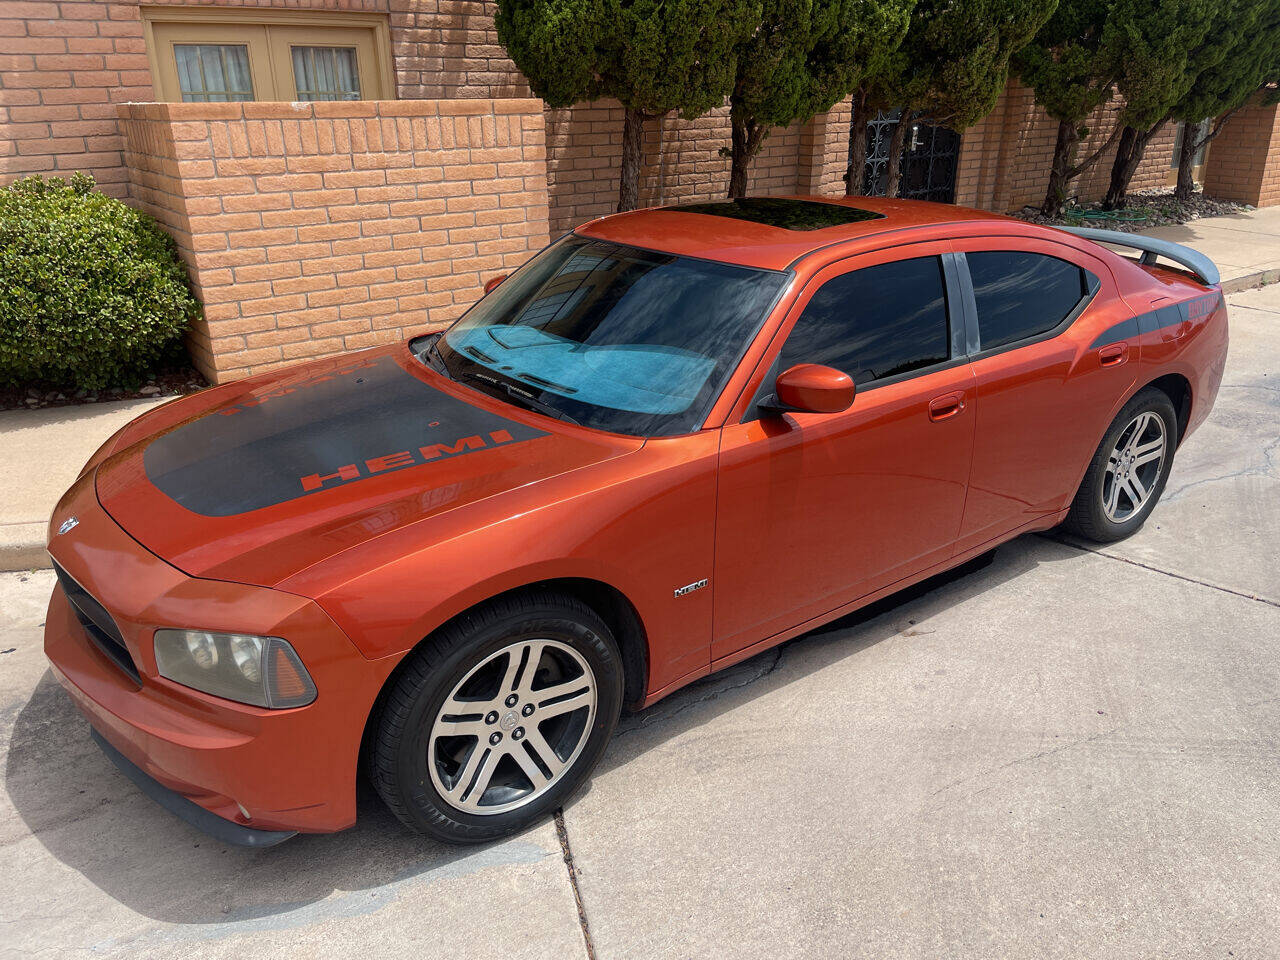 2006 Dodge Charger For Sale ®